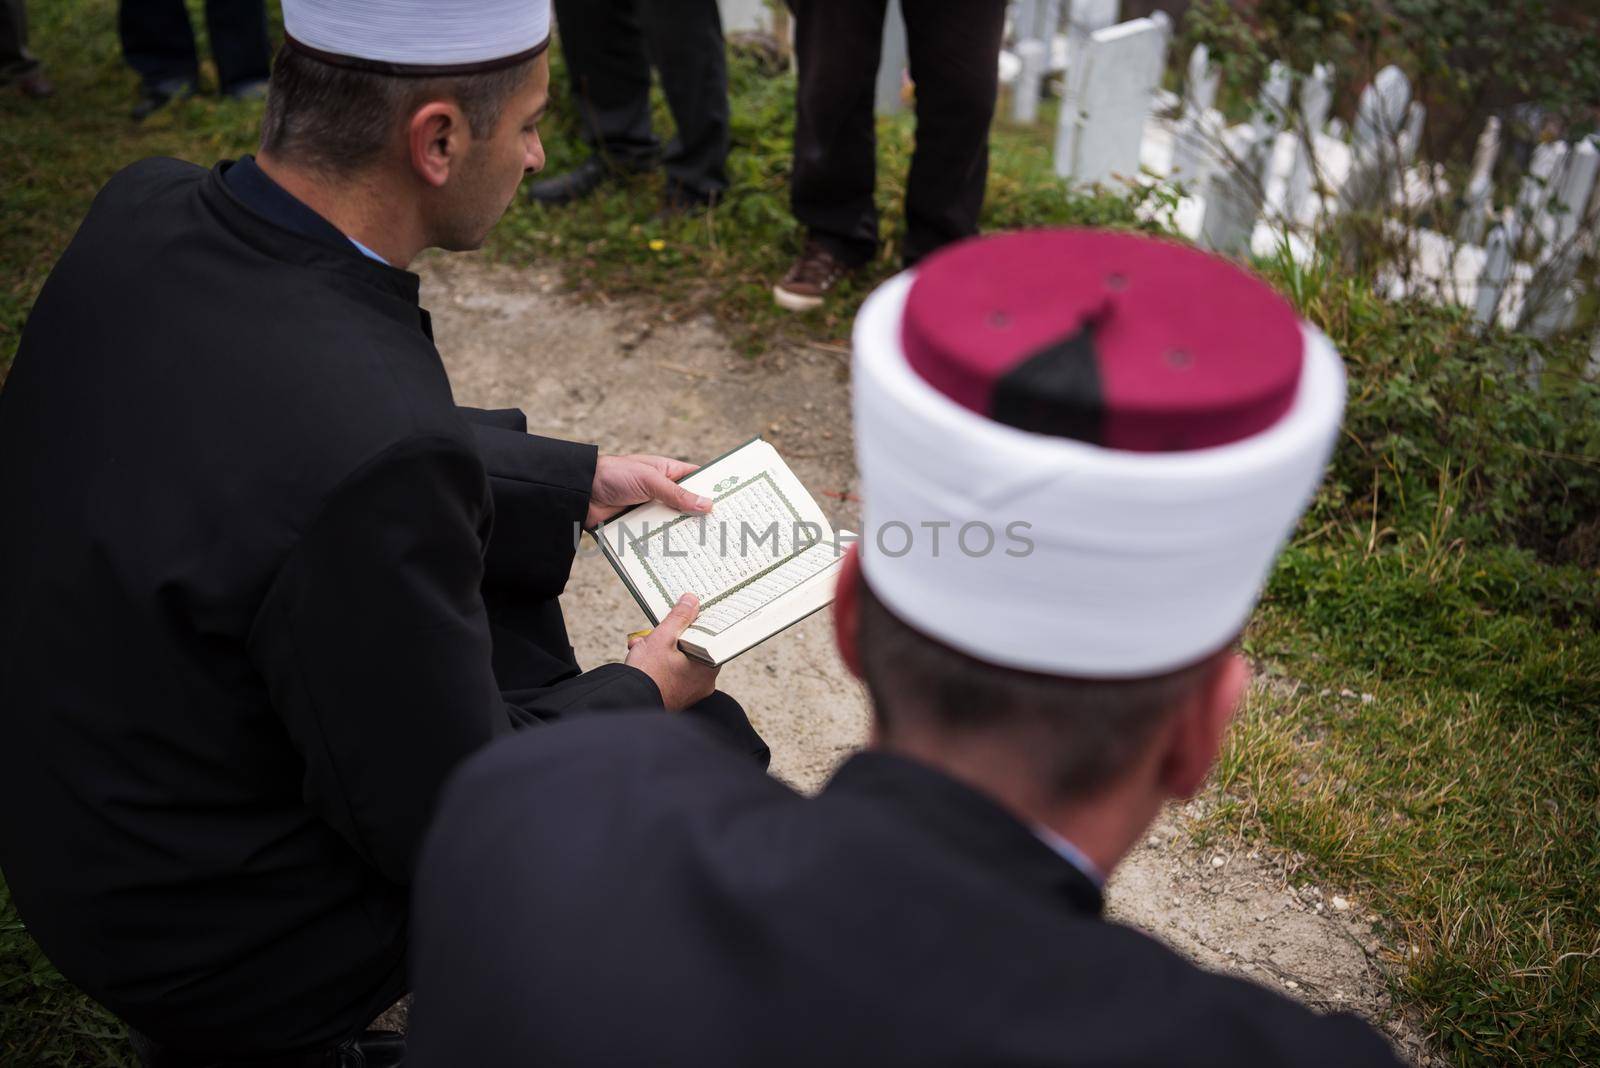 quran holy book reading by imam  on islamic funeral with white thumb stones graweyard background